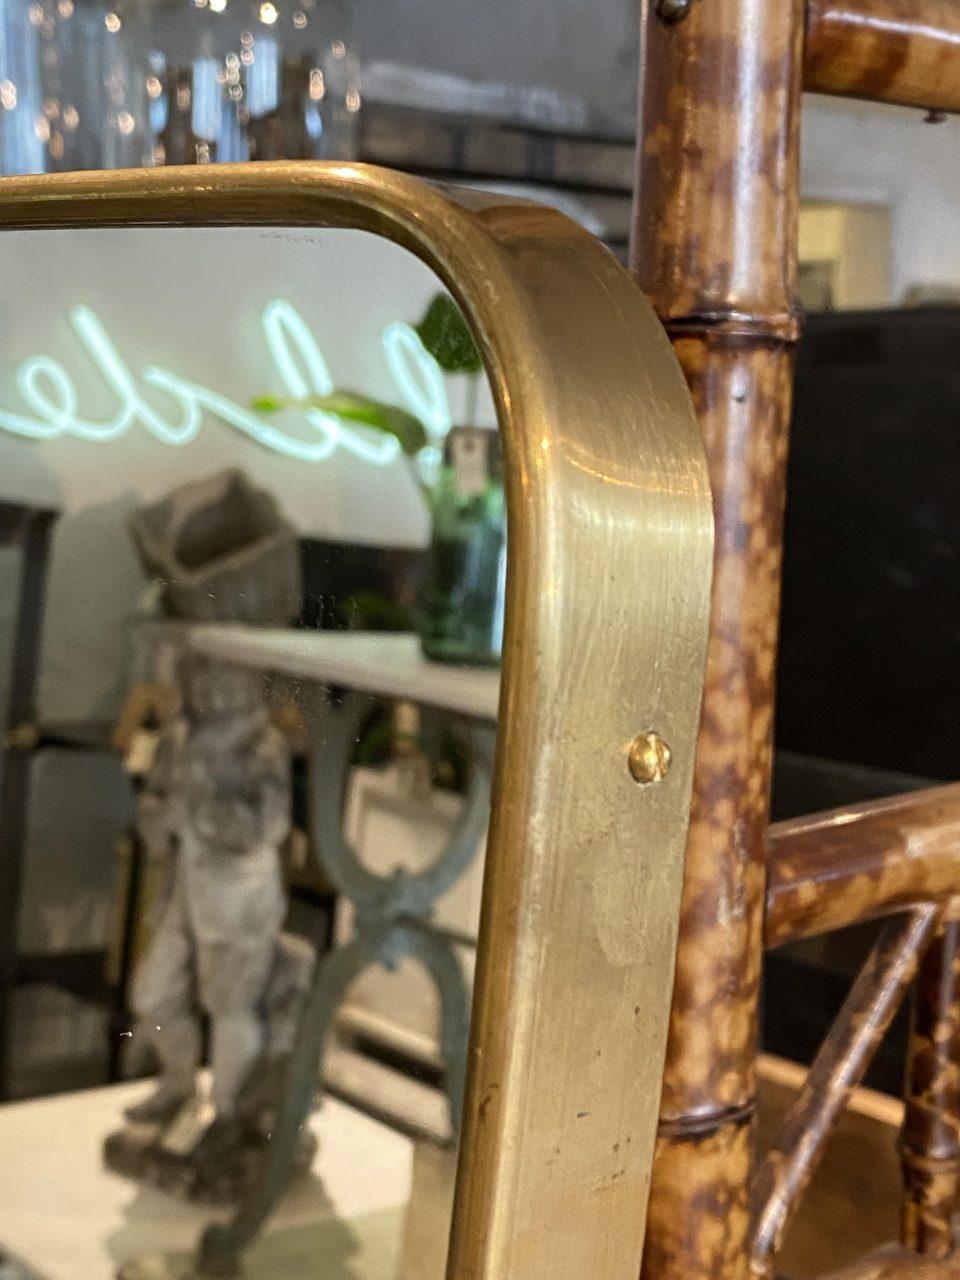 Beautiful Italian mirror from the 1950s, almost square, with a lovely clean sleek shape. The mirror is stylistically related to the designer Giò Ponti’s brass mirrors, and has suspension brackets mounted on the back.